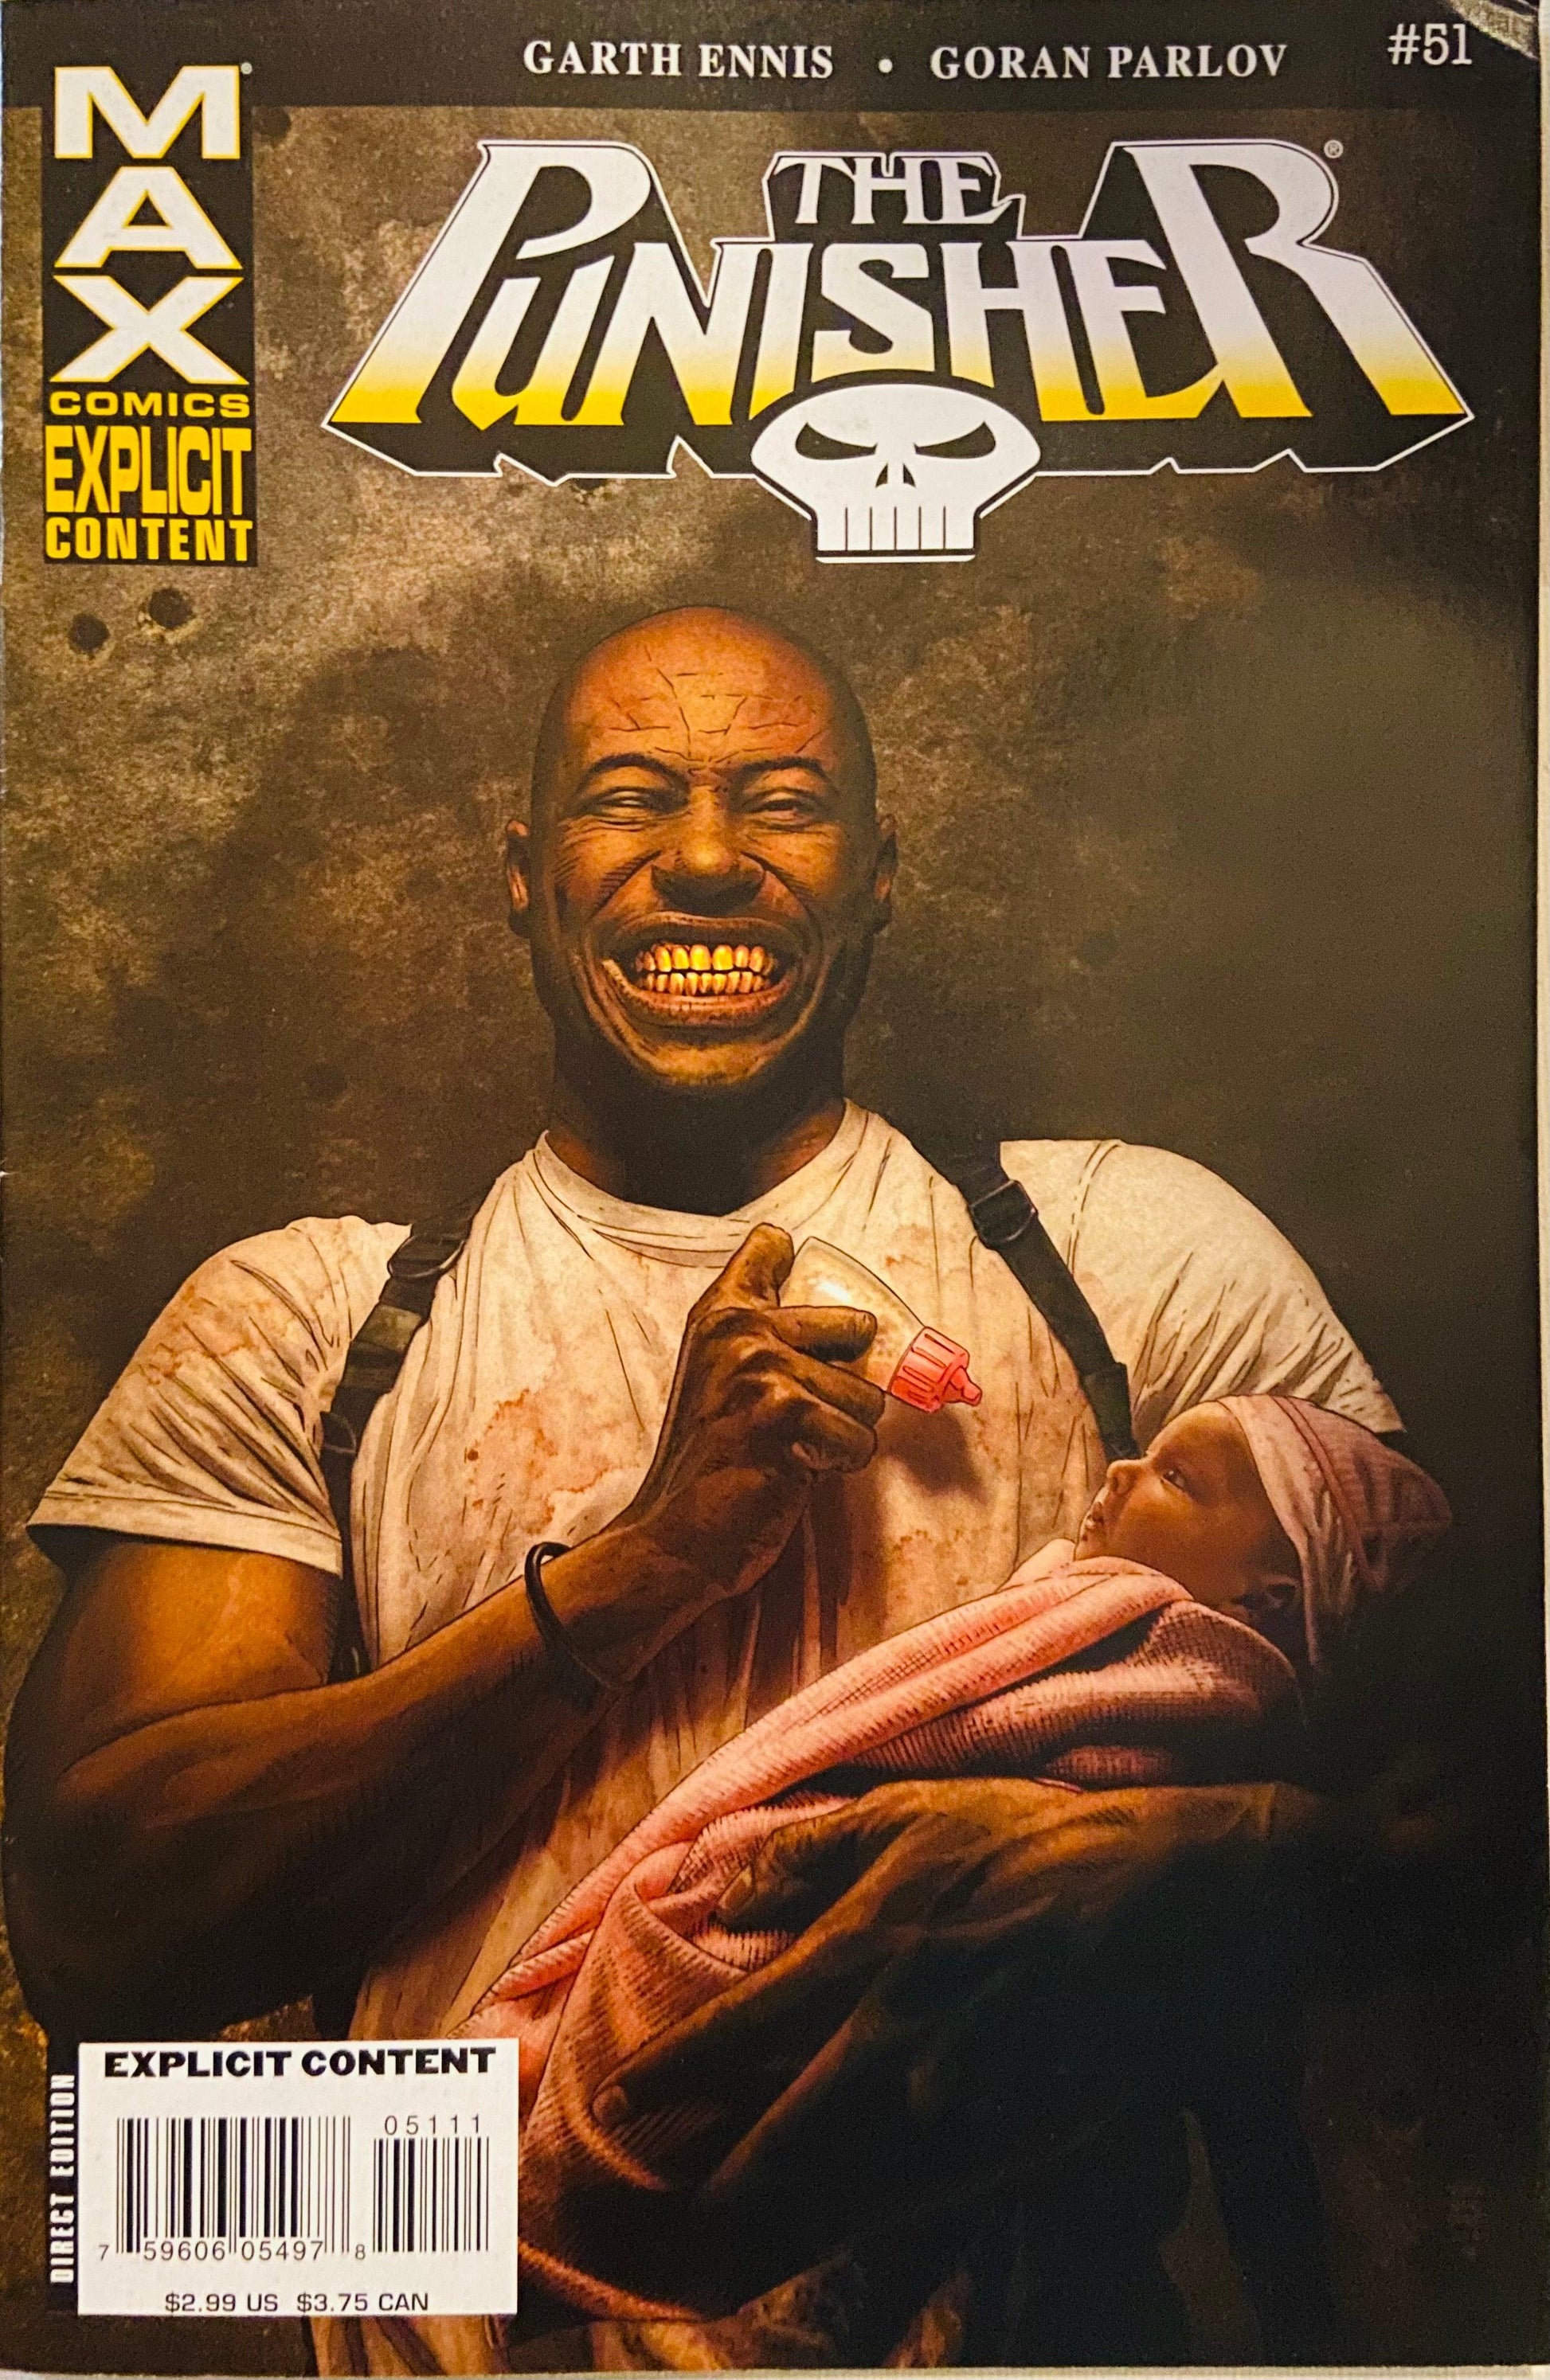 The Punisher #51 - HolyGrail Comix